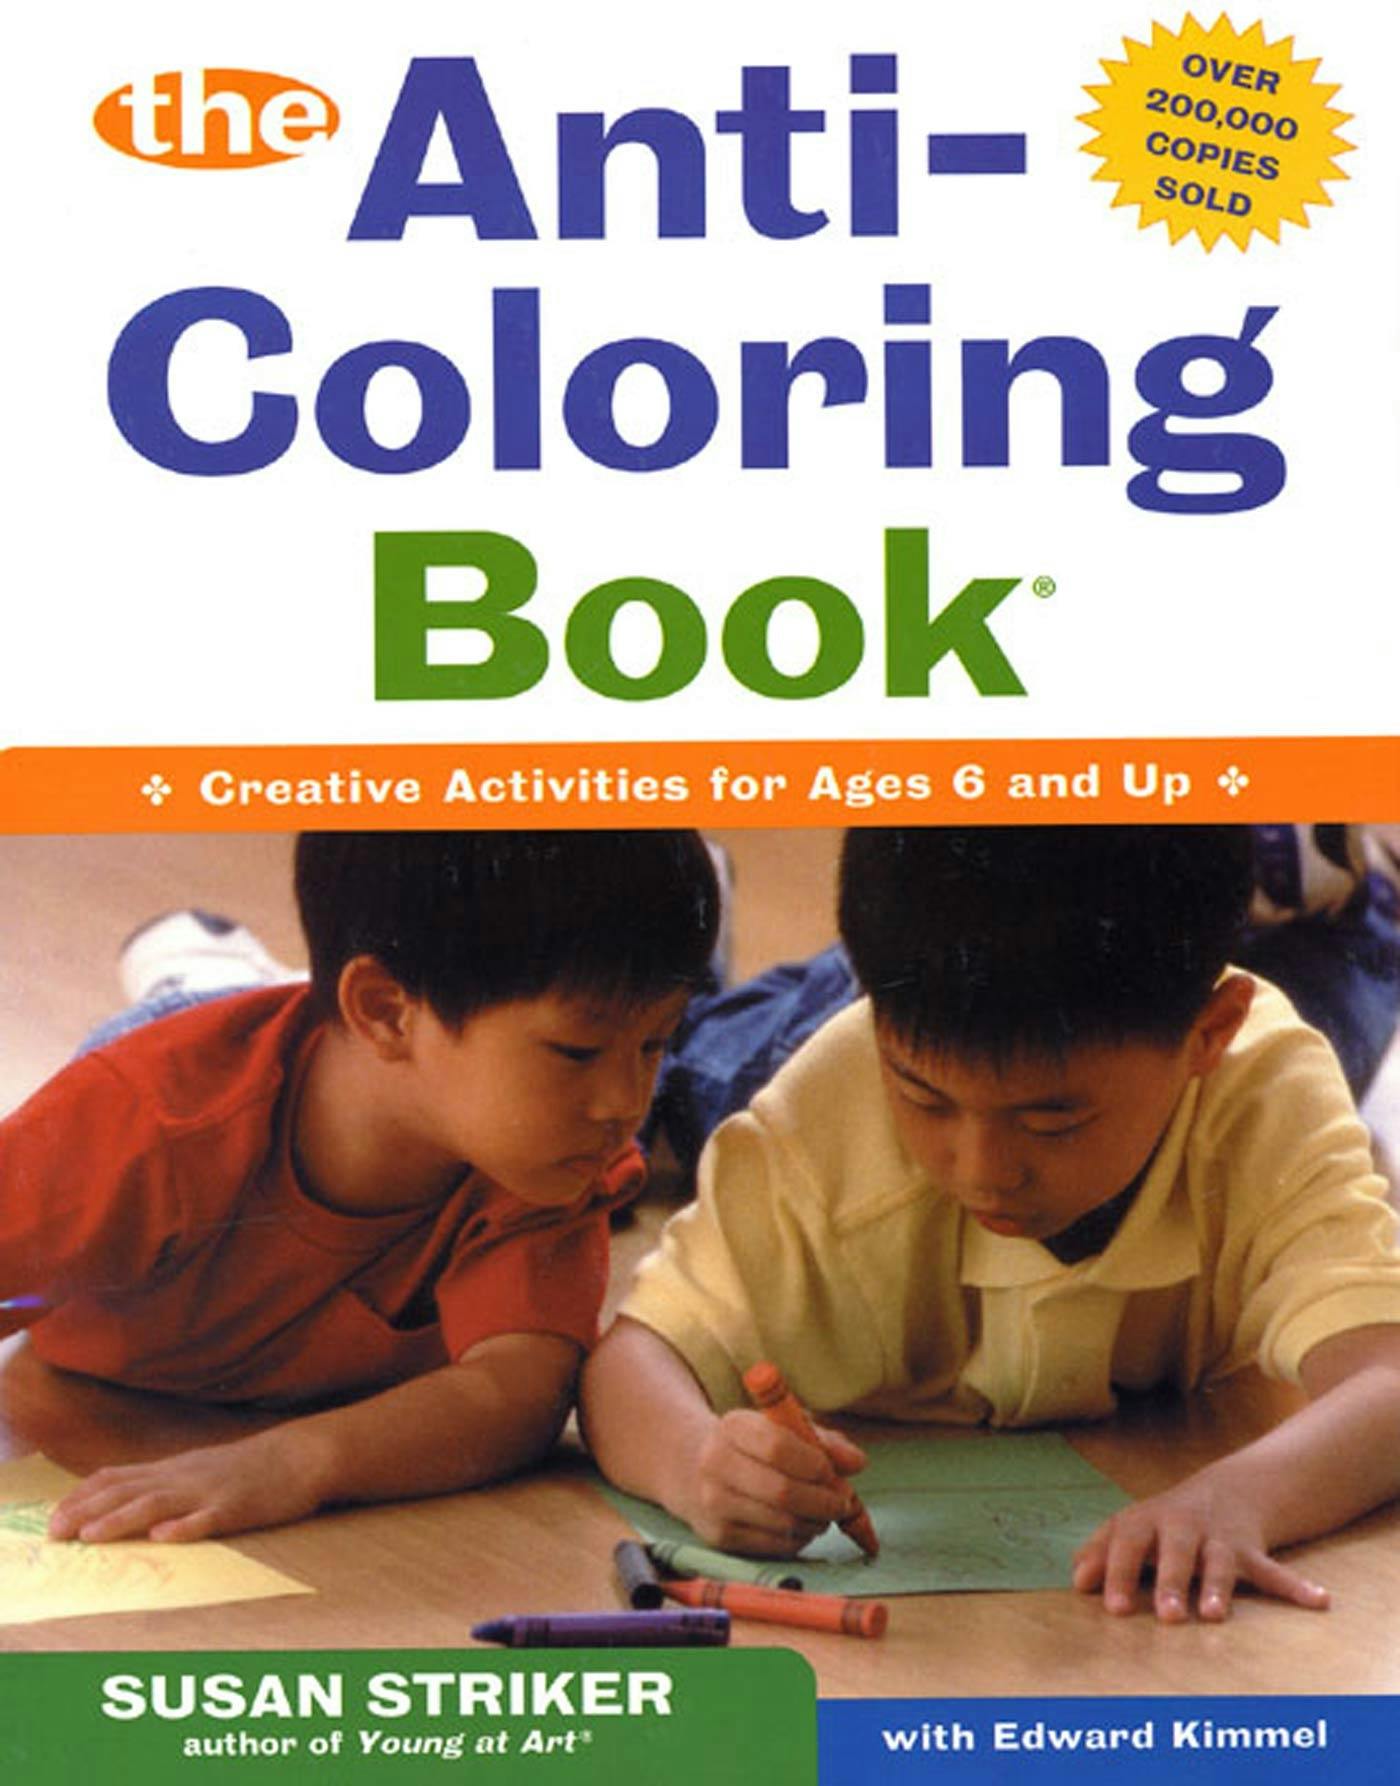 The First Anti-Coloring Book